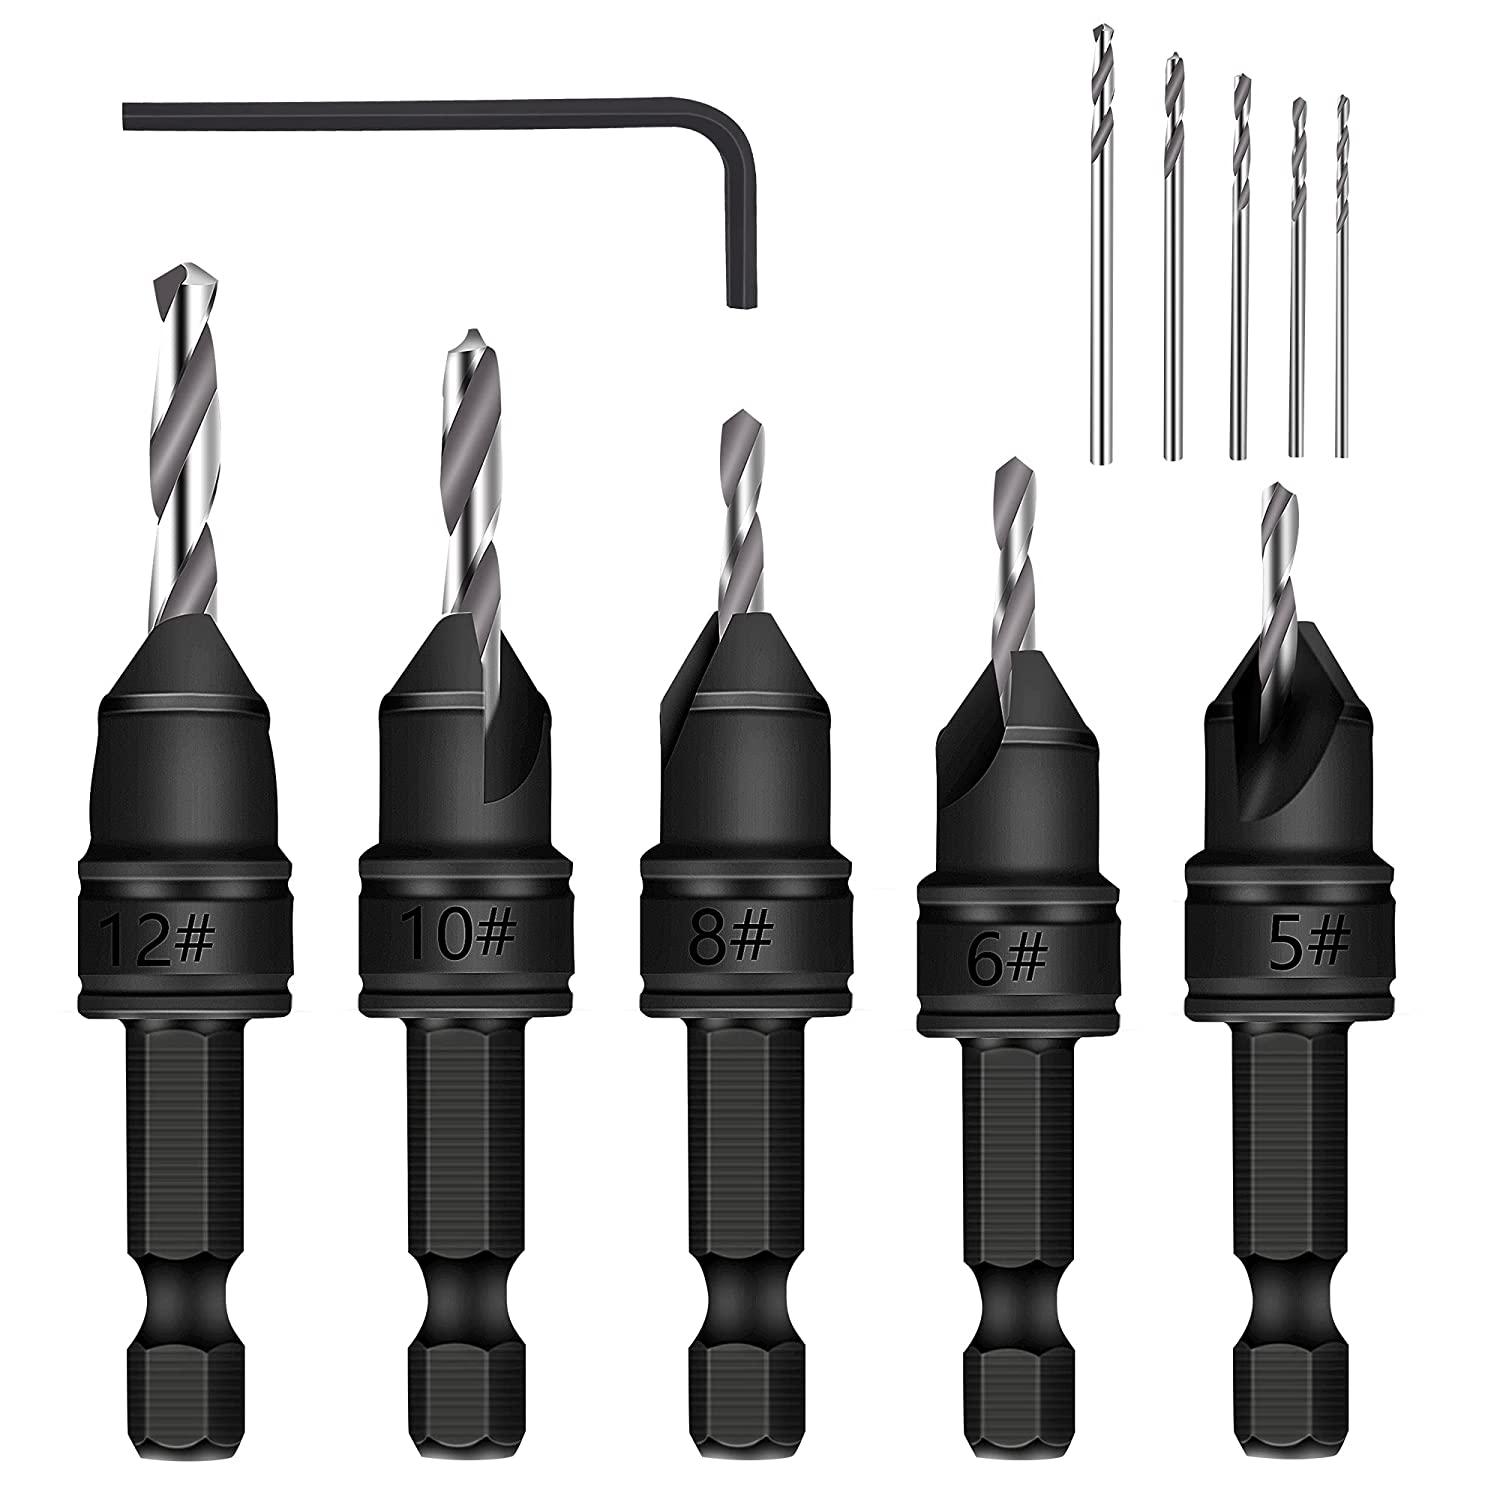 5pcs-82-Degree-Countersink-Drill-Bit-Set-for-Wood-Quick-Change-Chamfered-Adjustable-Drilling-Woodwor-1905154-1